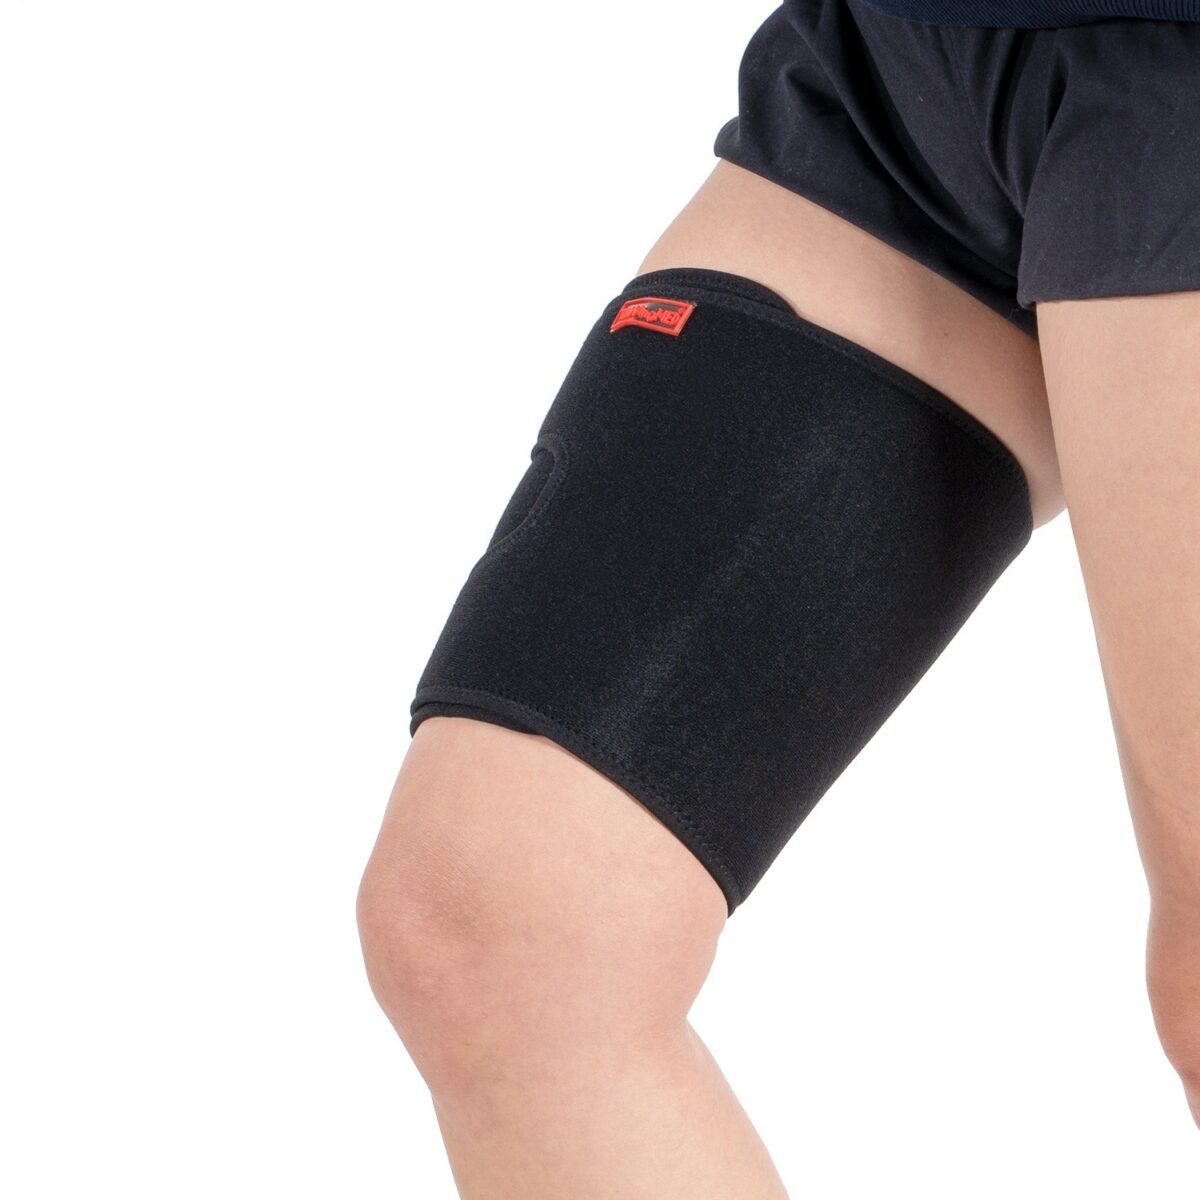 wingmed orthopedic equipments W522 thigh support 23